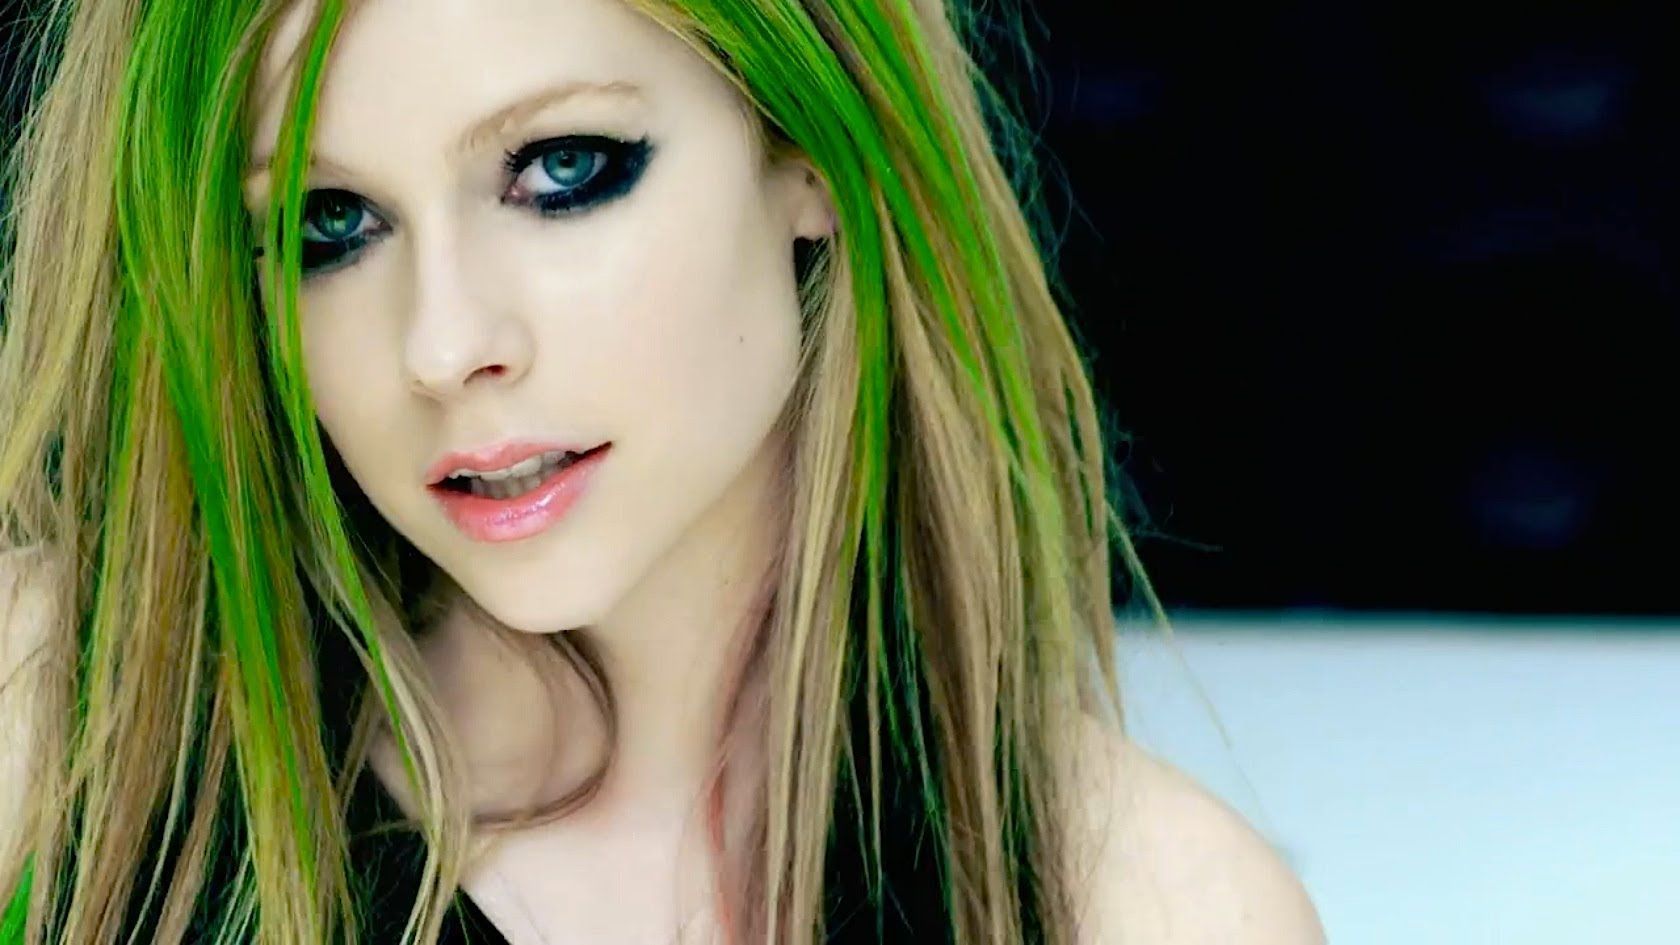 Avril Lavigne Music Video Makeup Tutorial. Hair styles, Avril lavigne picture, Green hair